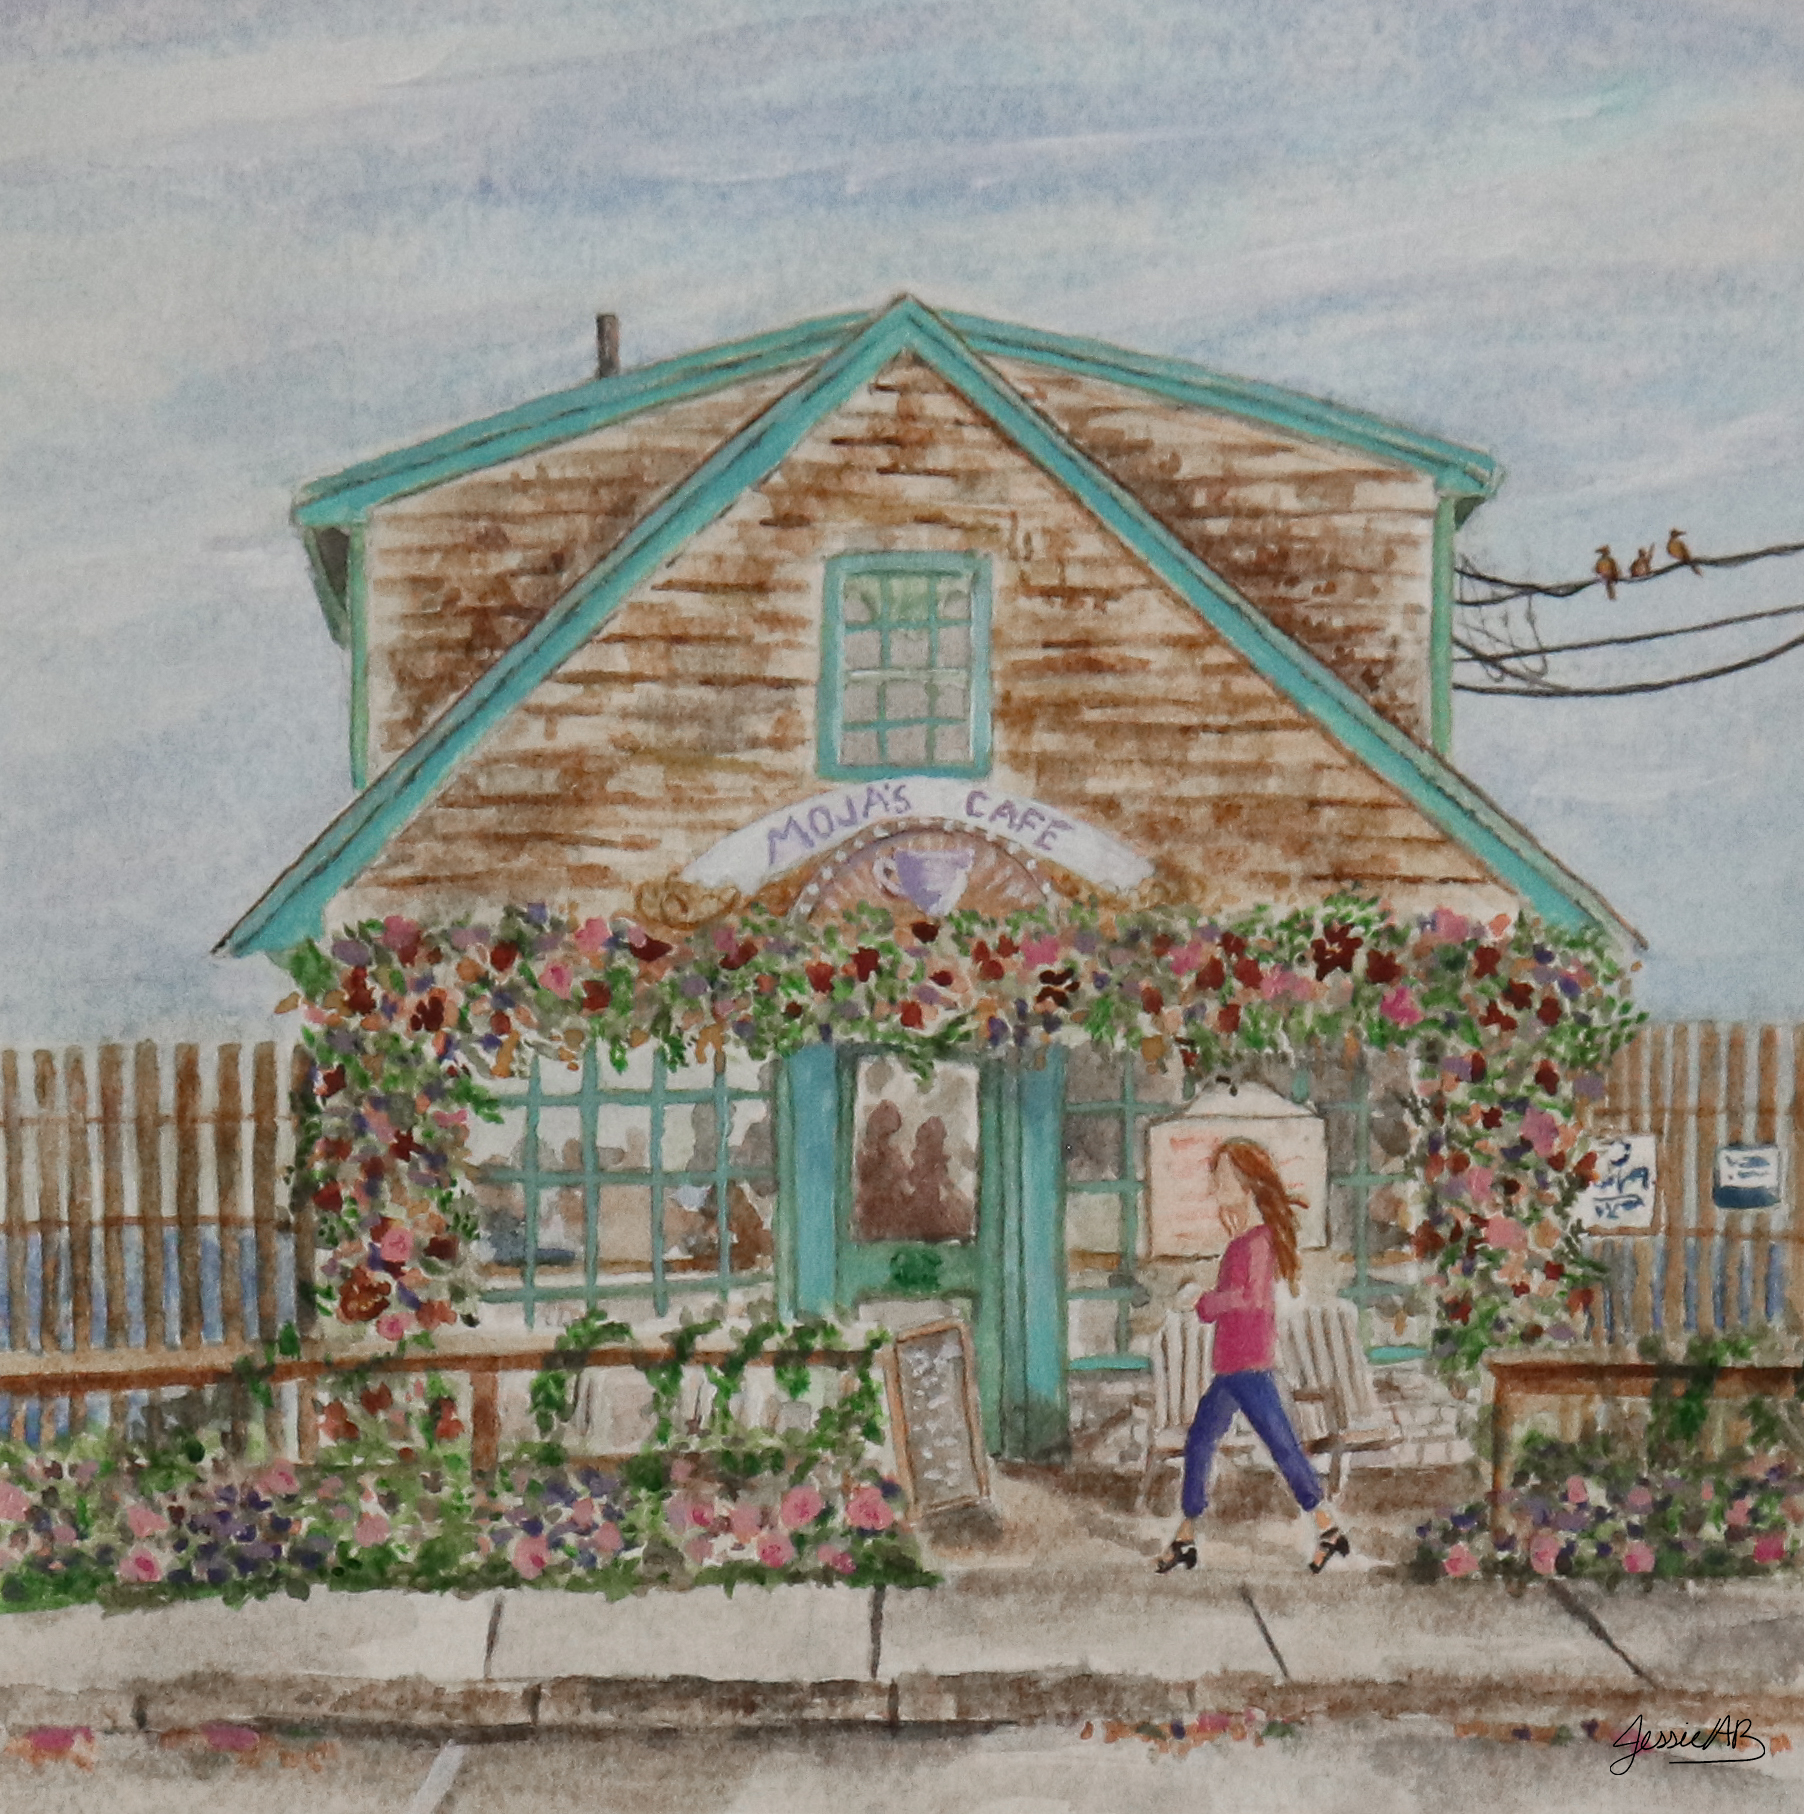 Moja's Cafe is a 9" X 9" original watercolor painting by Jessie Bettersworth